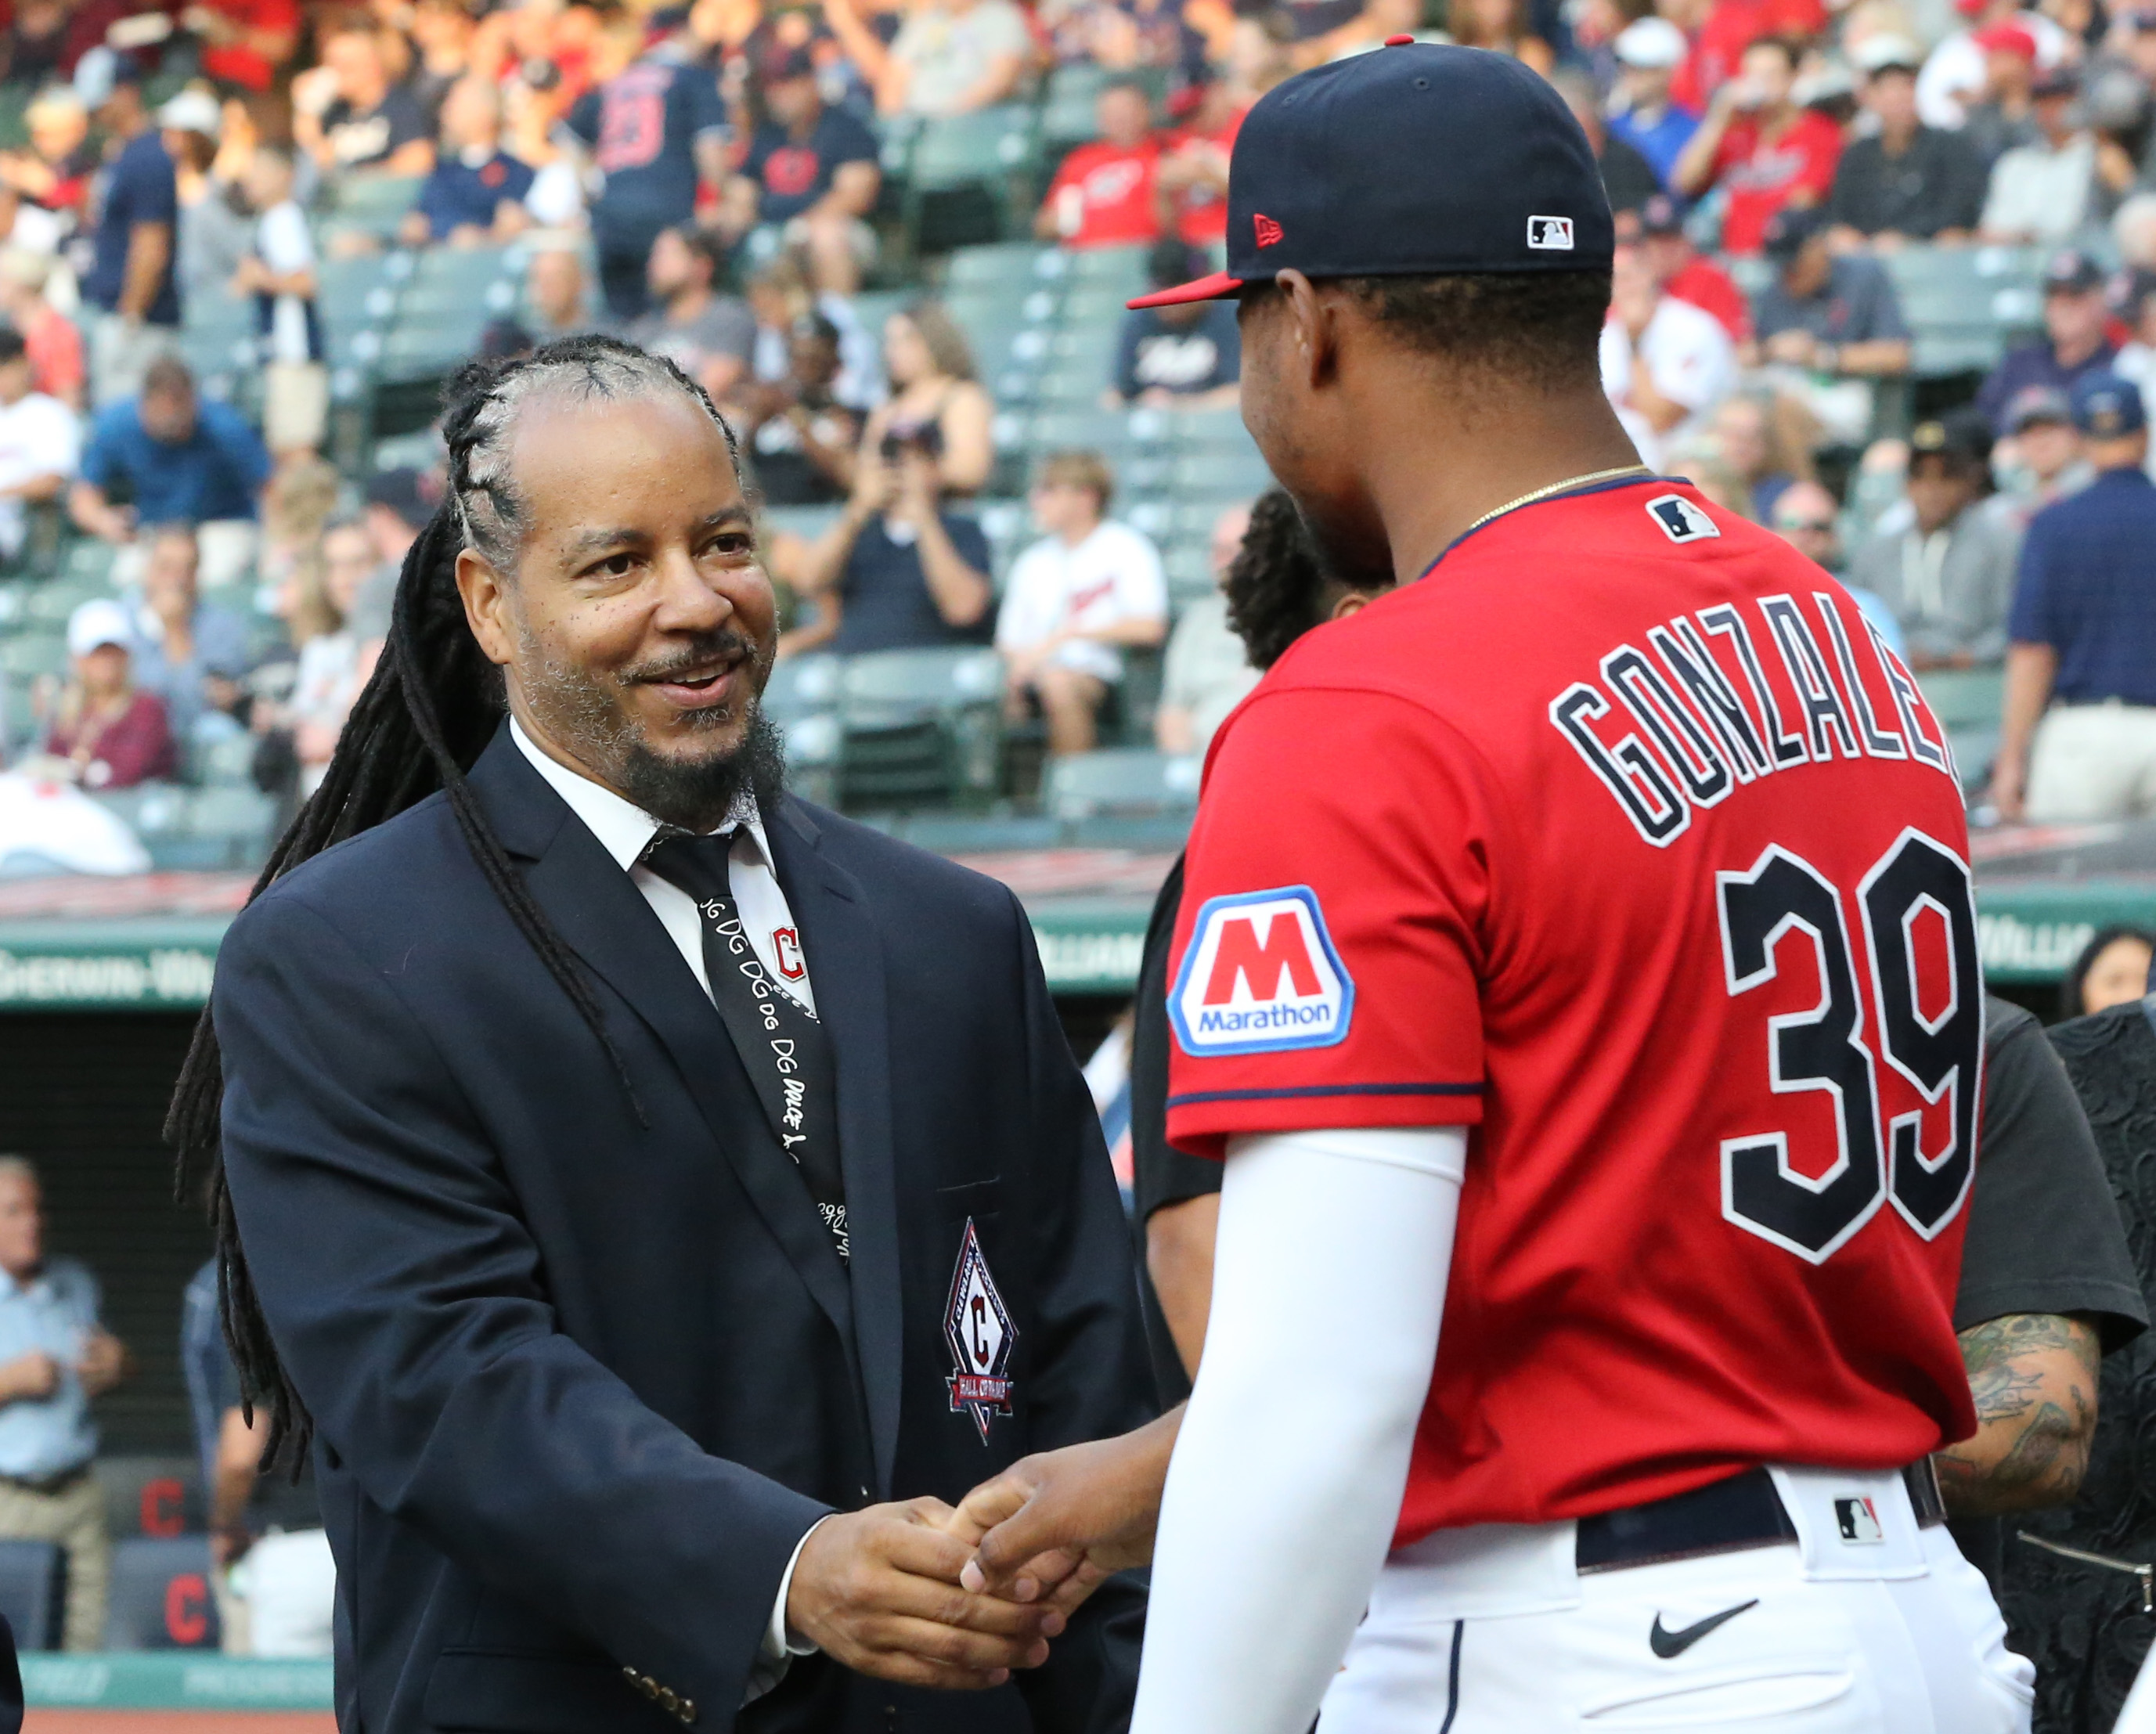 CLEVELAND, OH - AUGUST 19: Manny Ramirez is greeted by Detroit